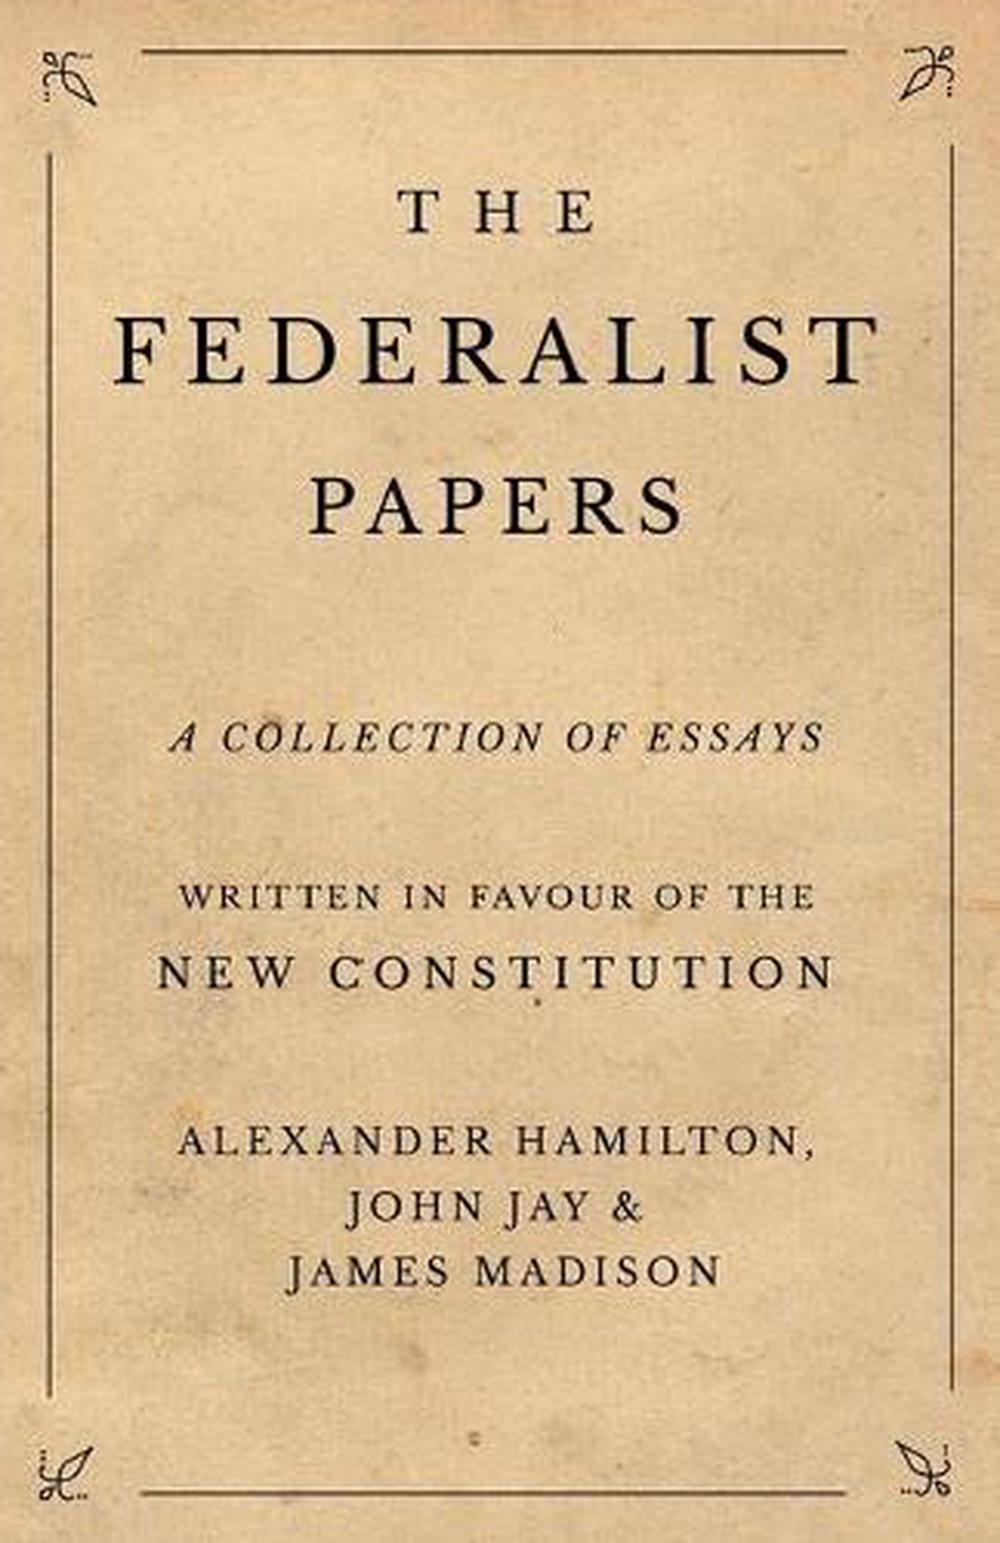 the federalist was a series of essays written to